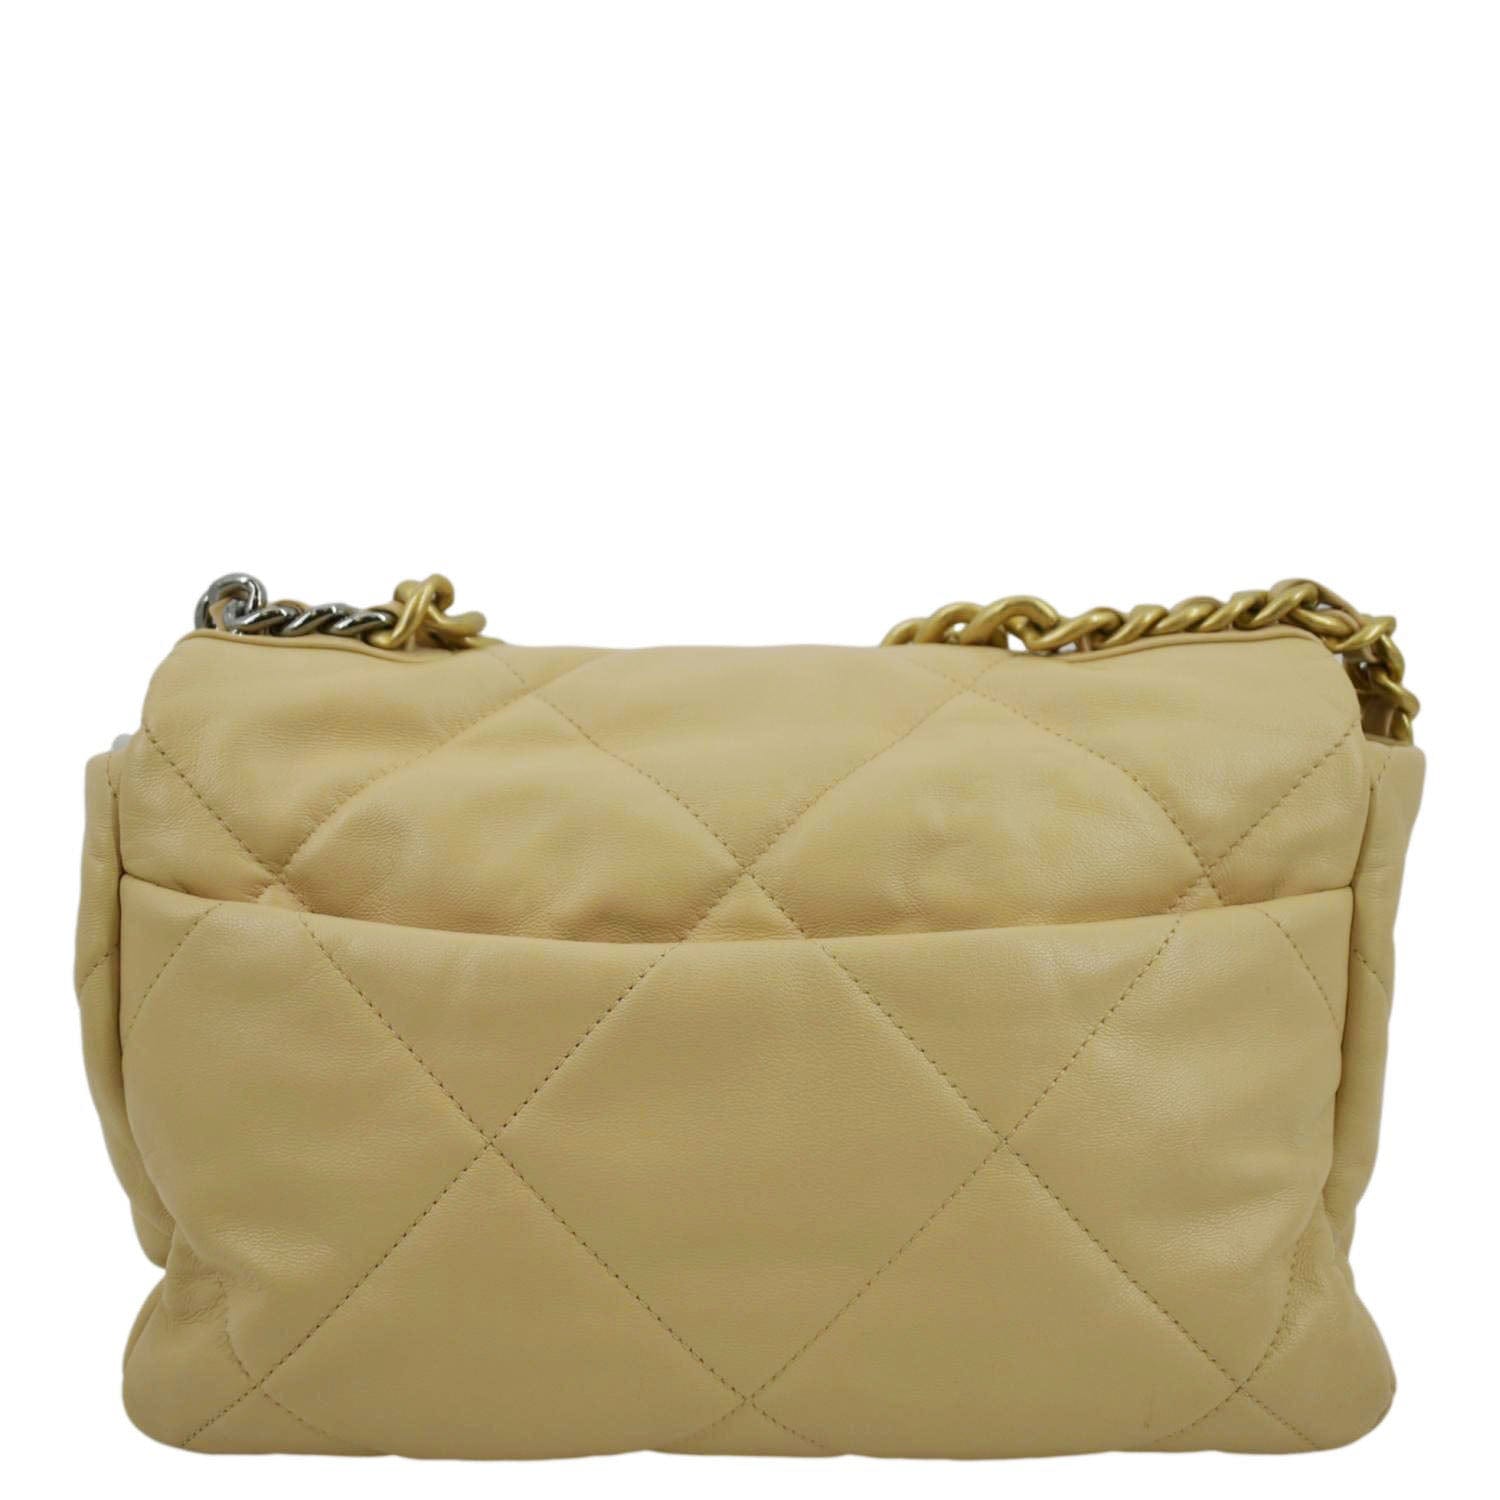 Chanel Yellow Quilted Lambskin Small Flap Wallet